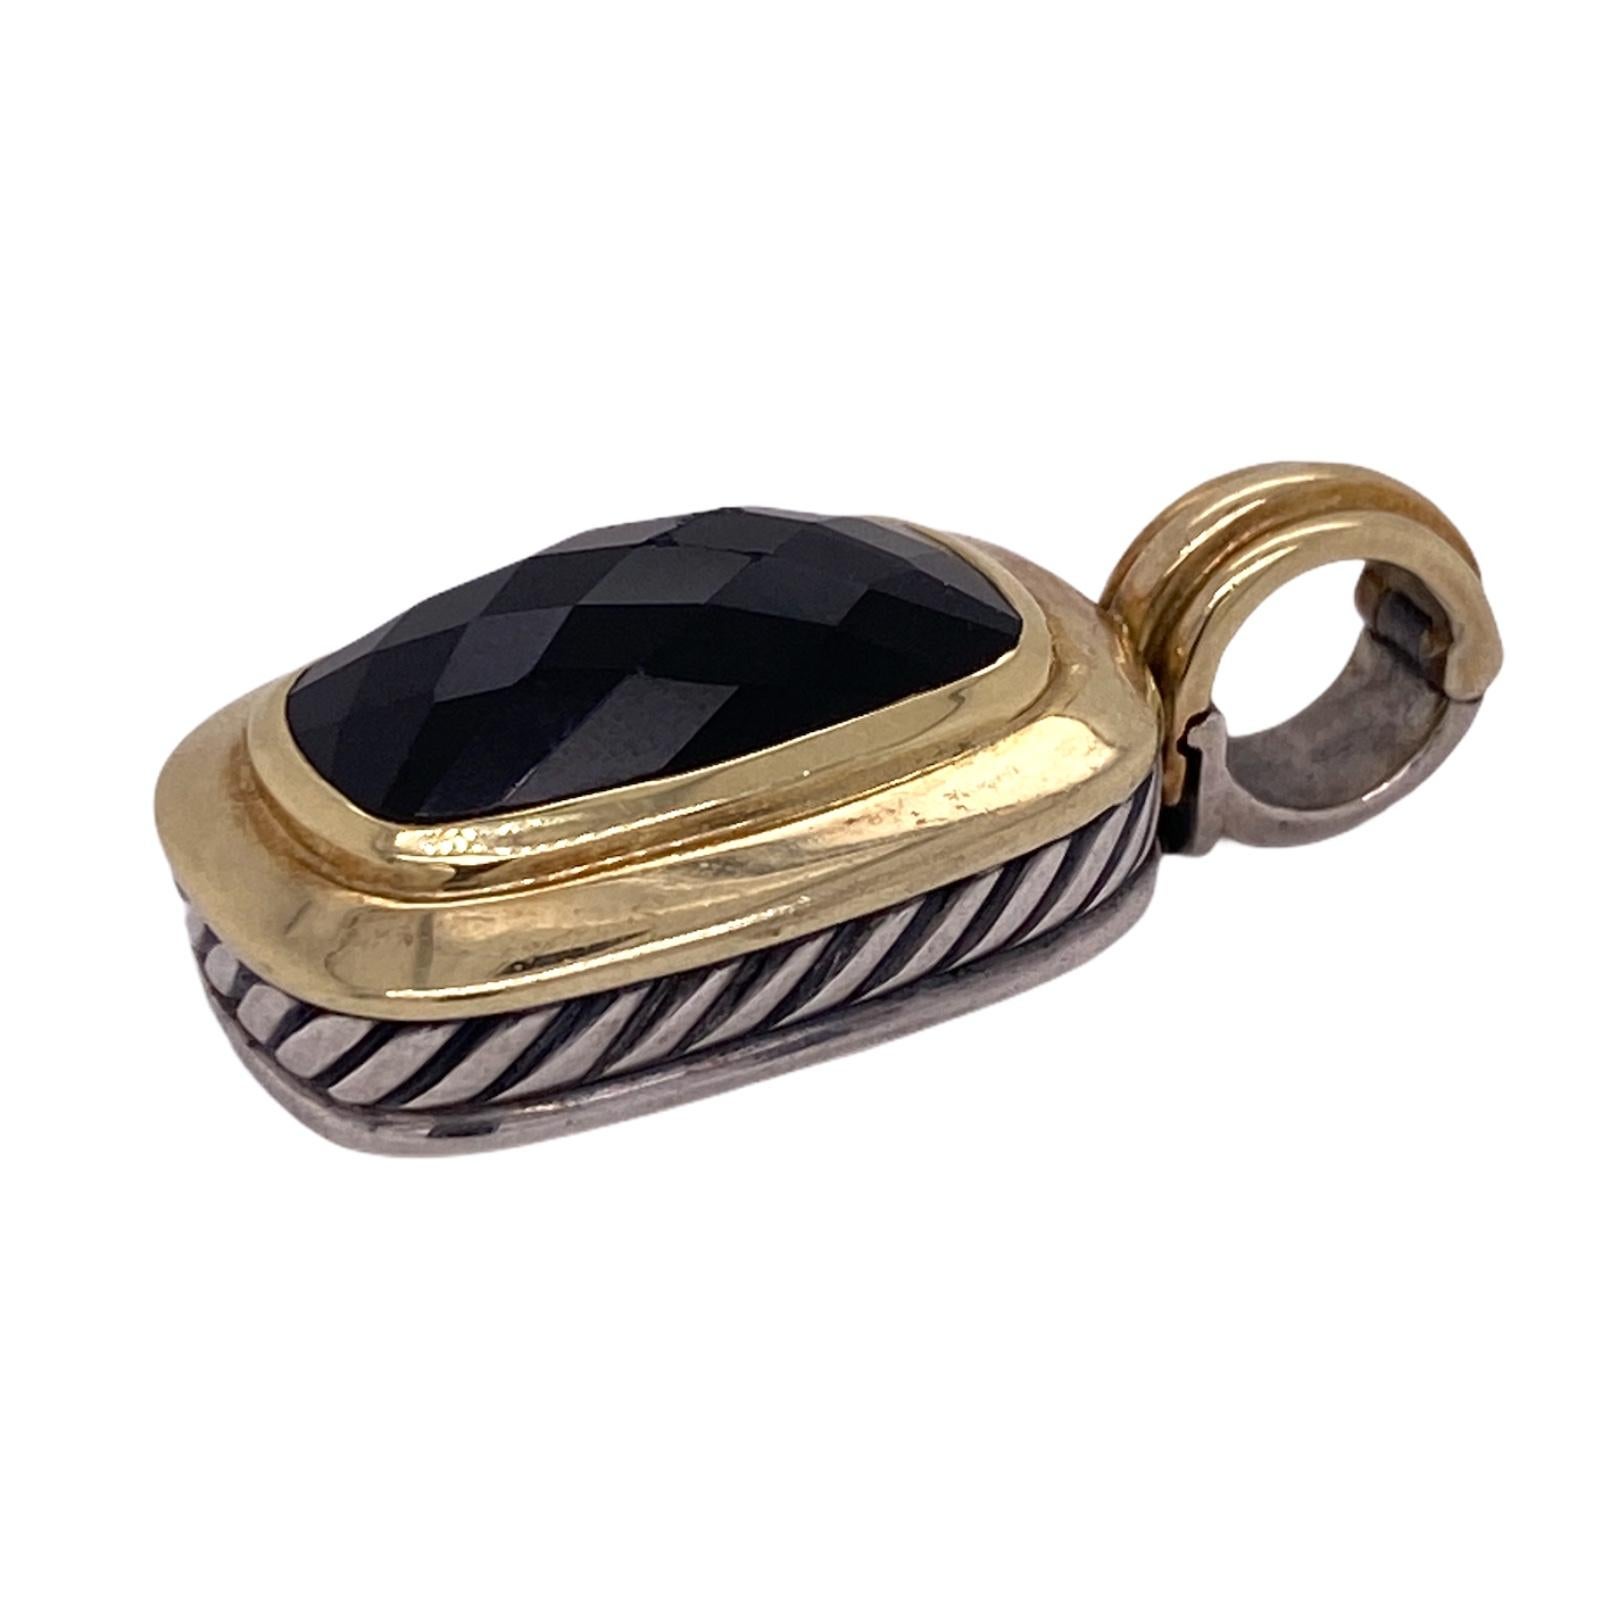 Beautiful Albion pendant by designer David Yurman fashioned in 18 karat yellow gold and sterling silver. The pendant features a rectangular faceted onyx gemstone set in an 18 karat yellow gold front. Yurman's classic cable design is seen on the